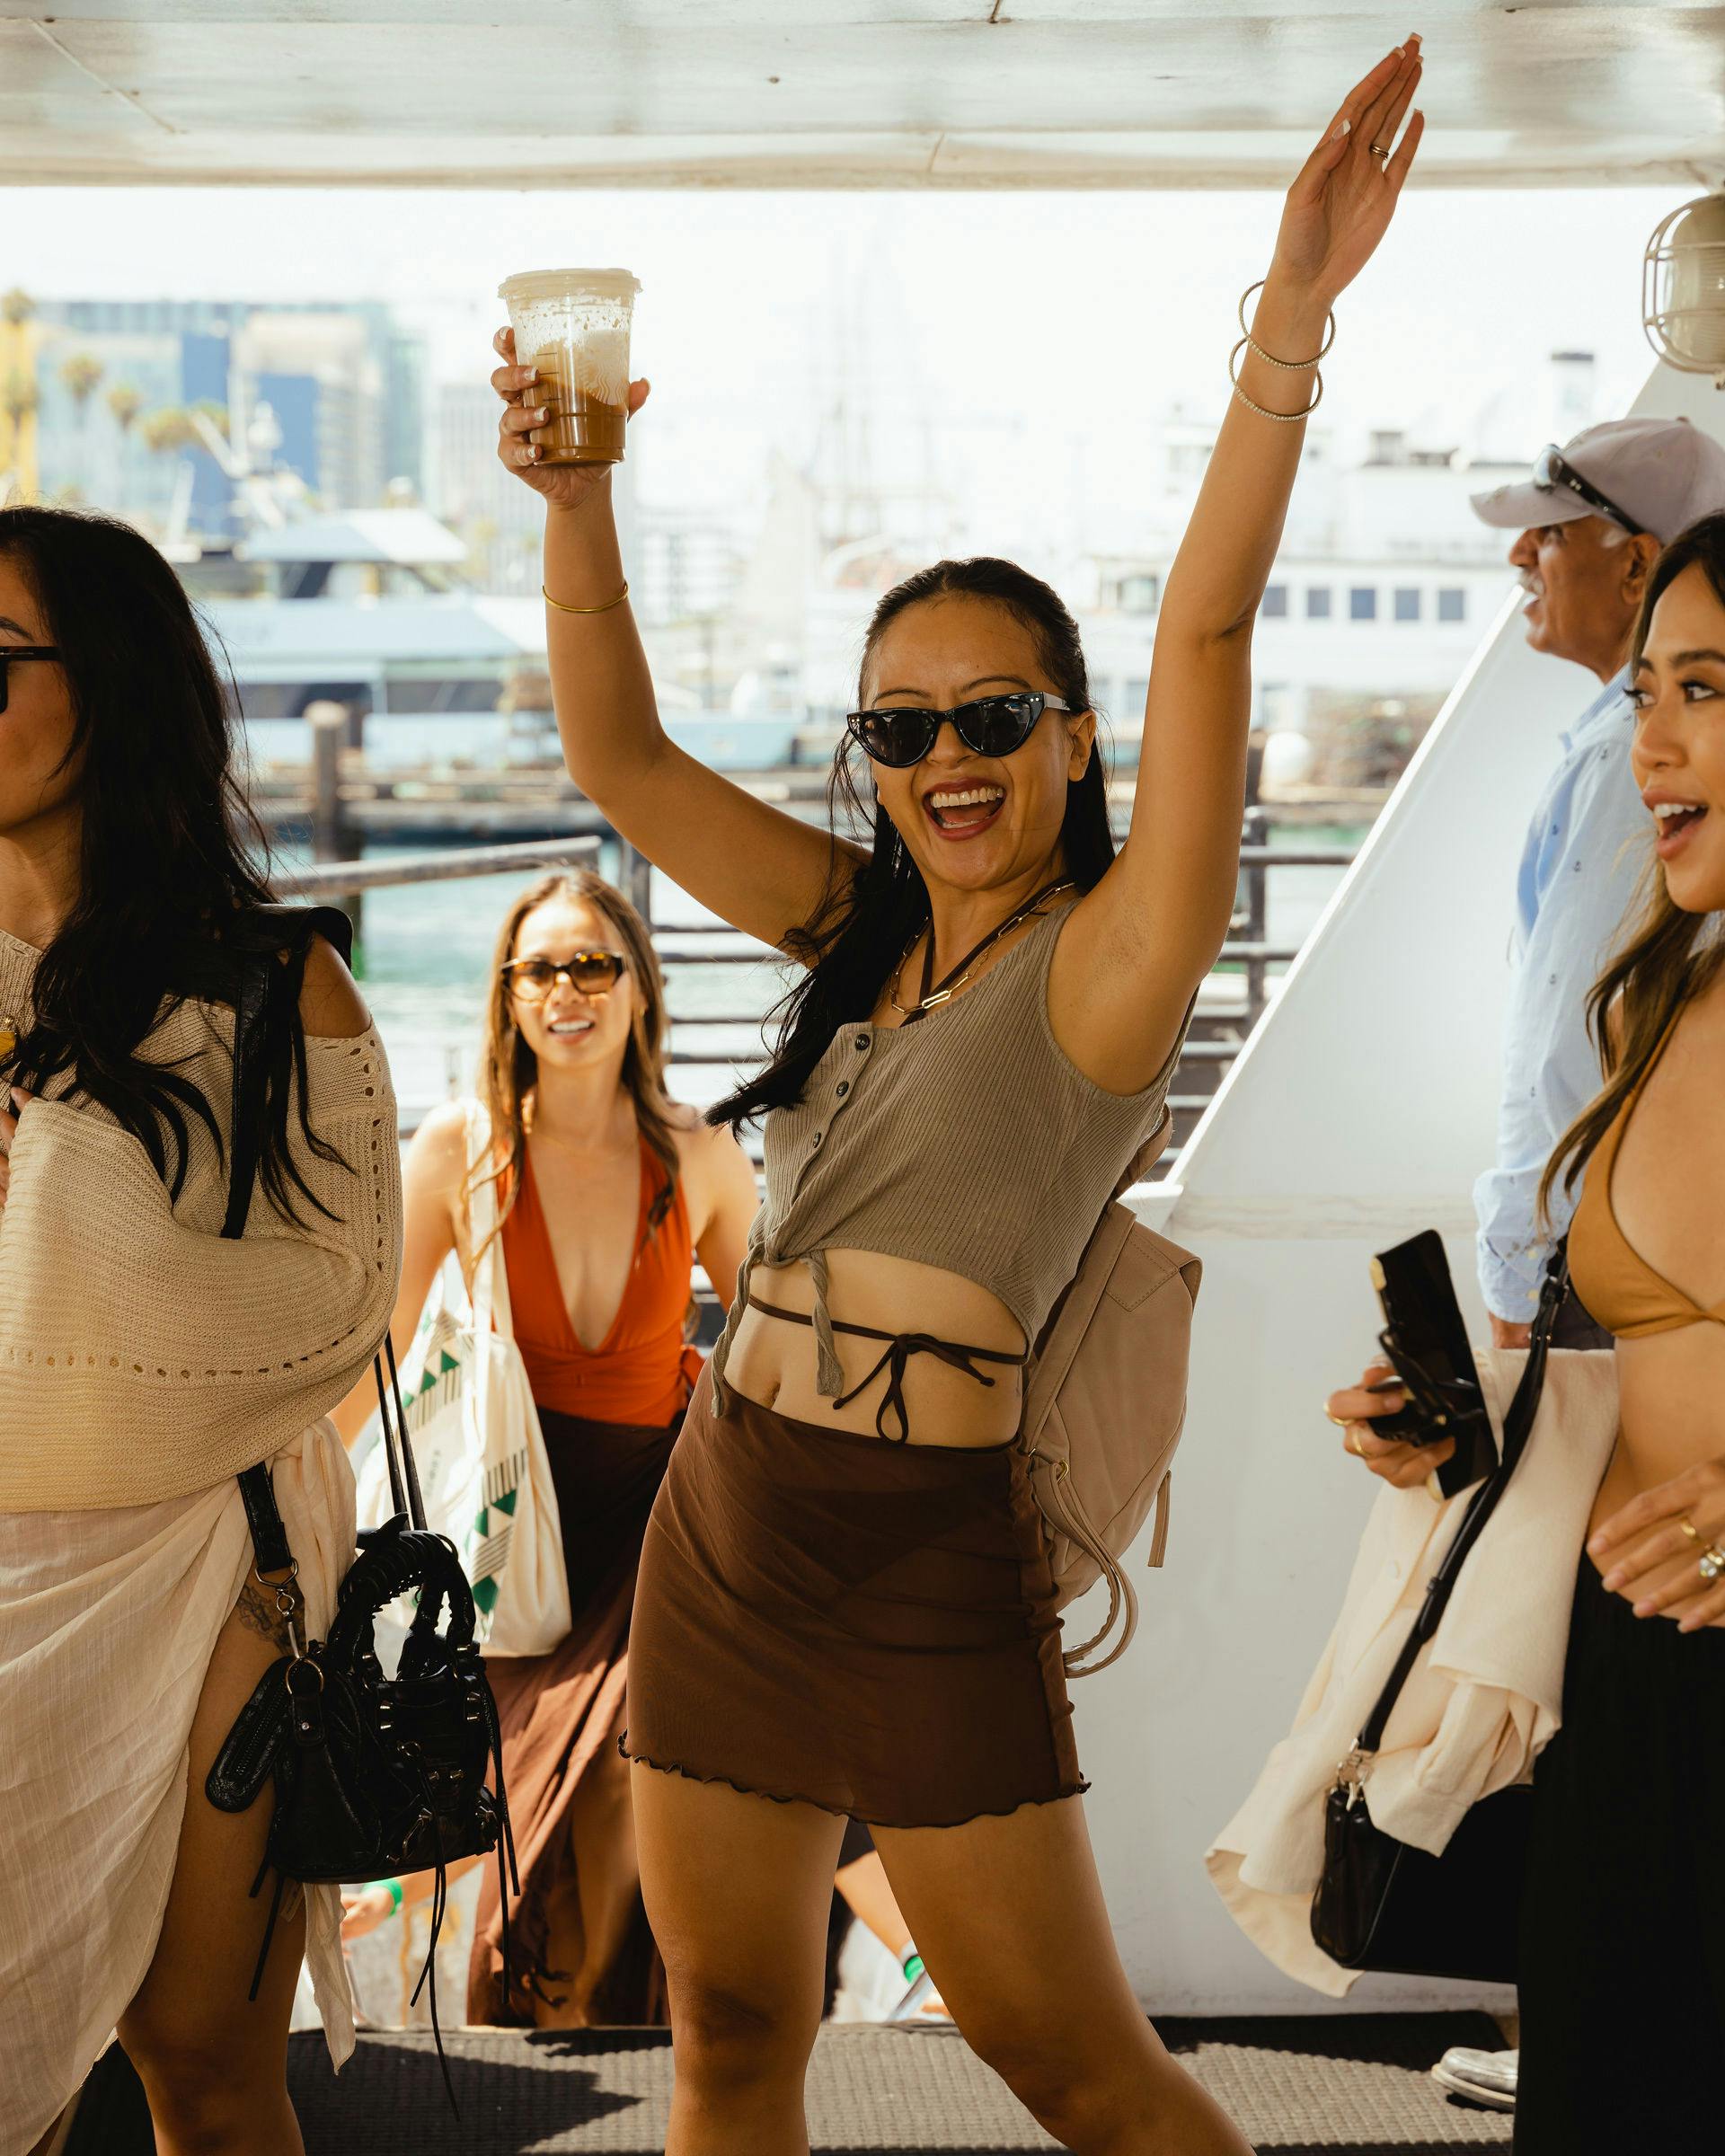 Get Brunchfaced on Party Boat: An All-Inclusive Brunch Experience Aboard a Private 47' Luxury Catamaran image 1